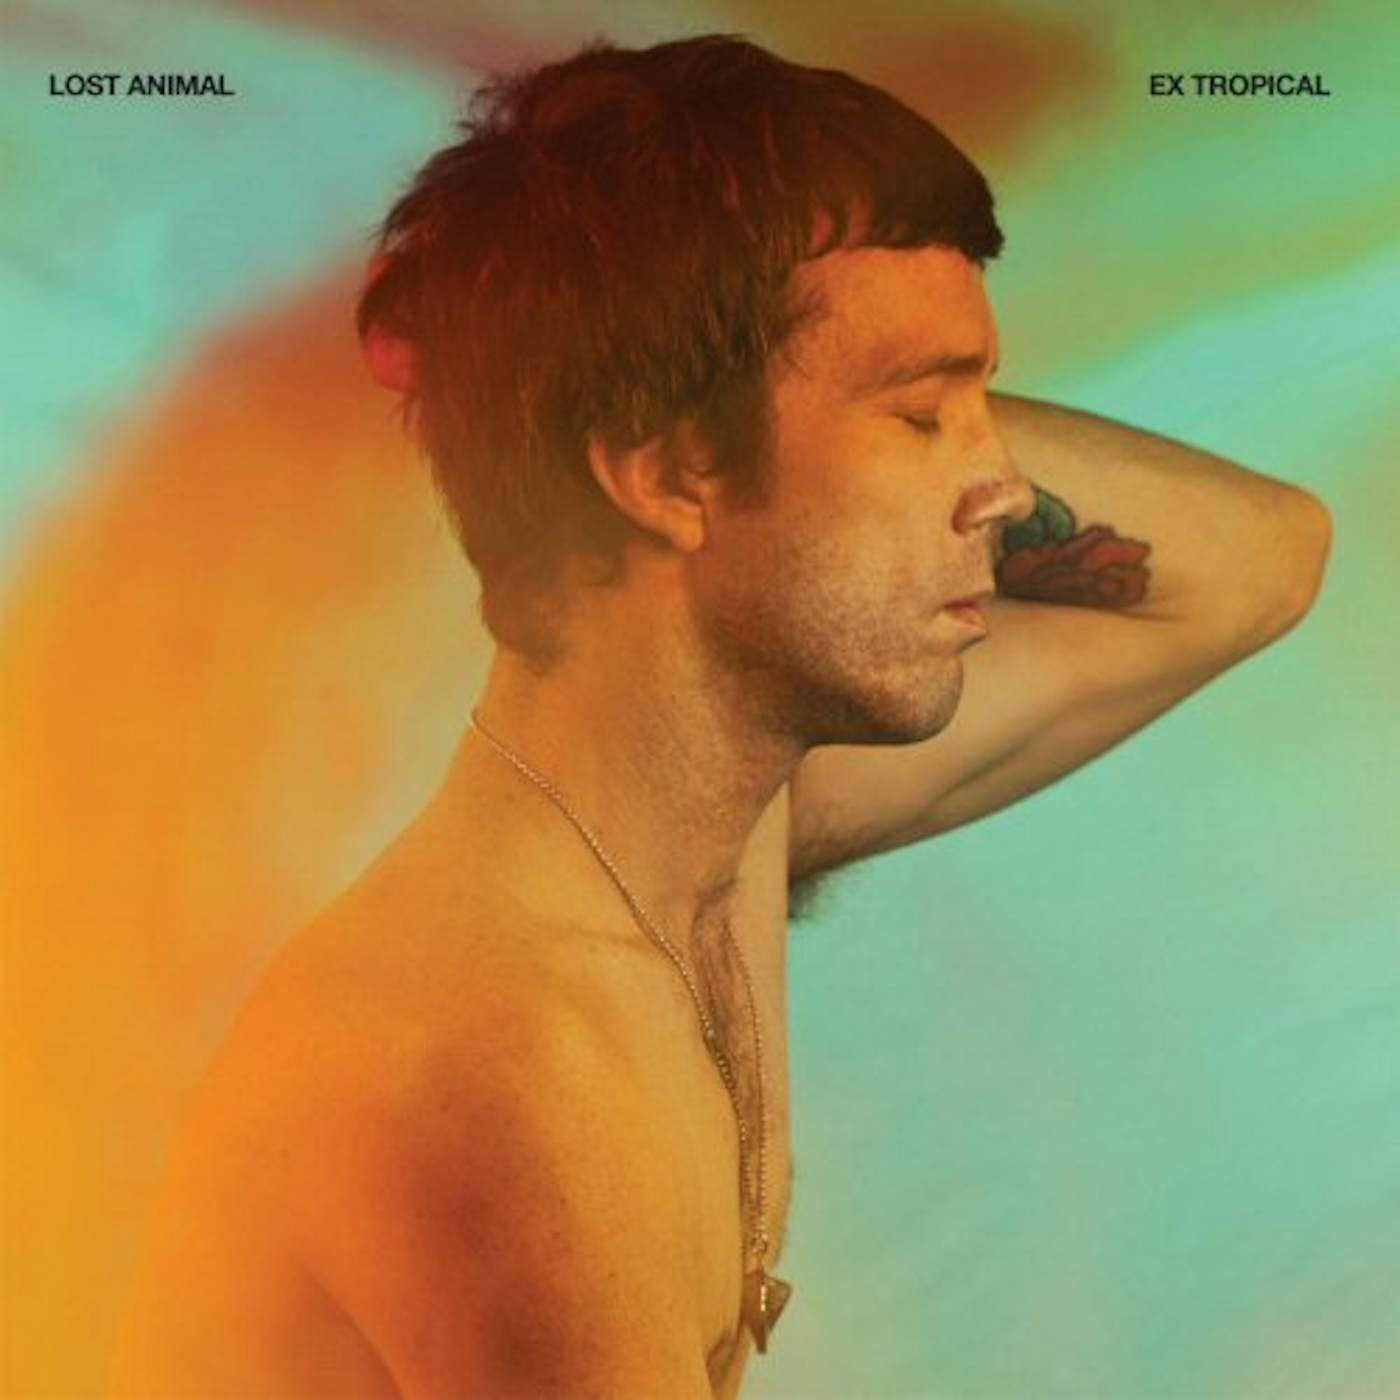 Lost Animal EX TROPICAL CD